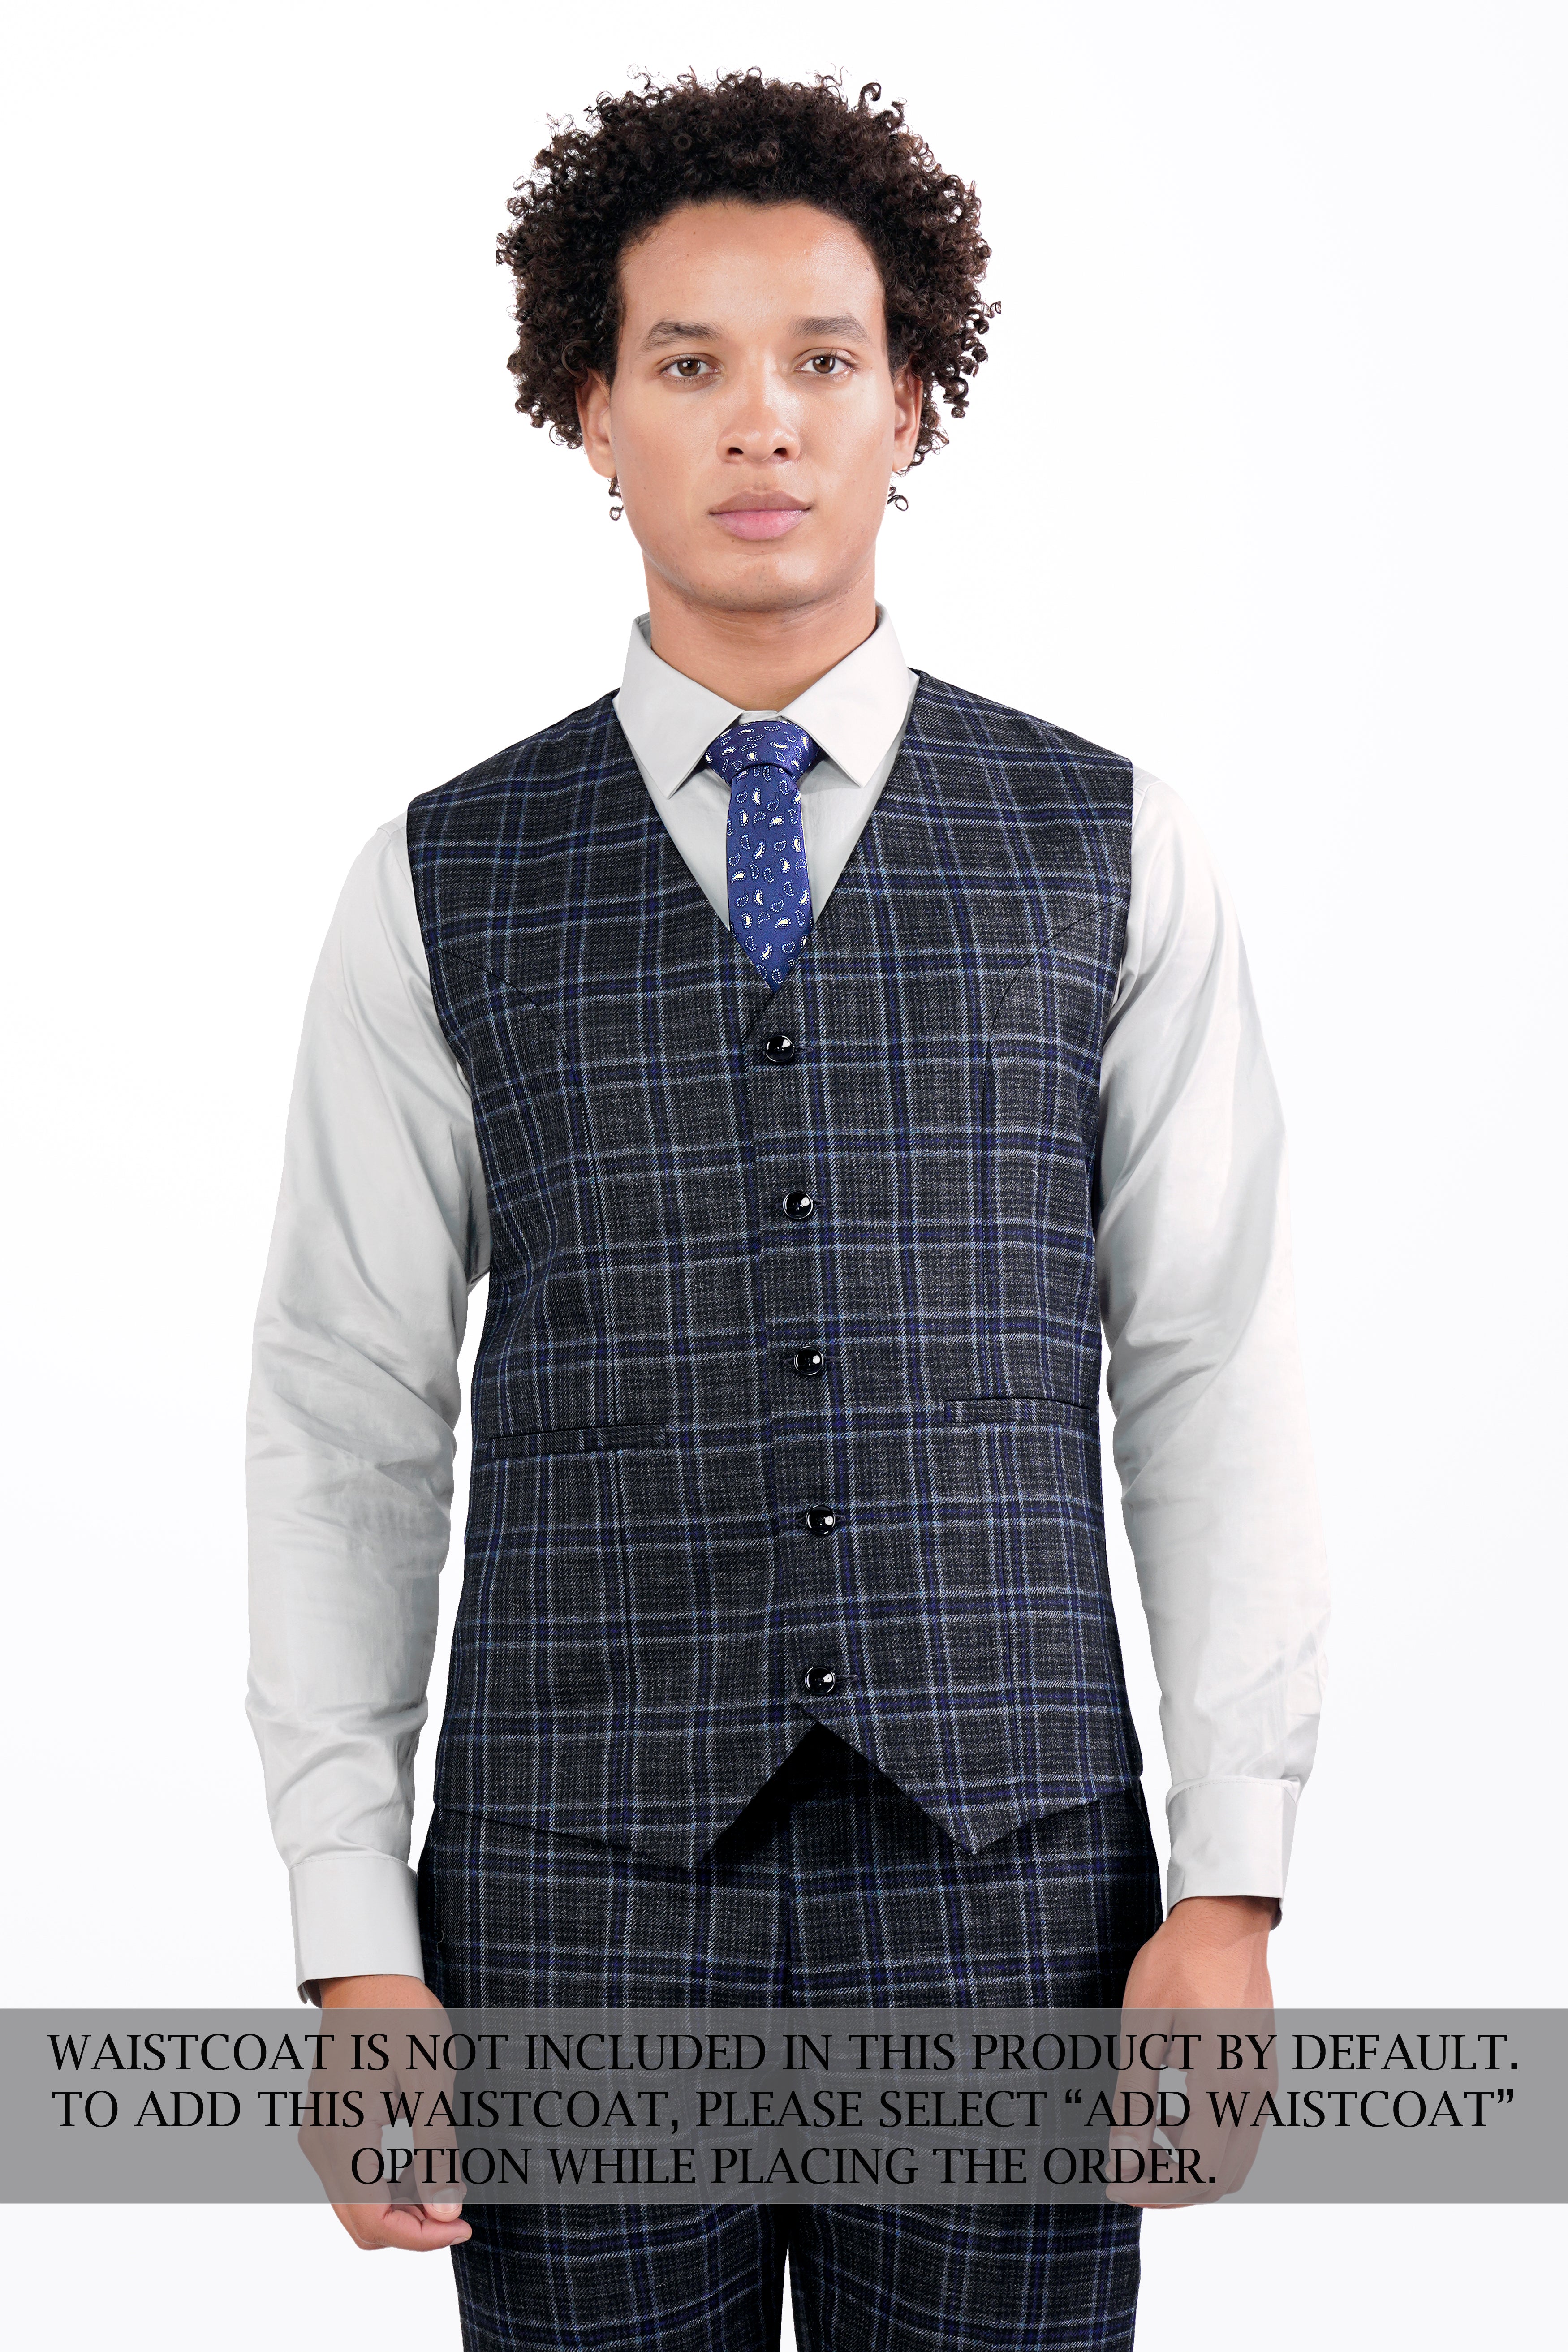 Bleached Black and Marine Blue Plaid Double Breasted Tweed Suit ST2907-DB-36, ST2907-DB-38, ST2907-DB-40, ST2907-DB-42, ST2907-DB-44, ST2907-DB-46, ST2907-DB-48, ST2907-DB-50, ST2907-DB-52, ST2907-DB-54, ST2907-DB-56, ST2907-DB-58, ST2907-DB-60